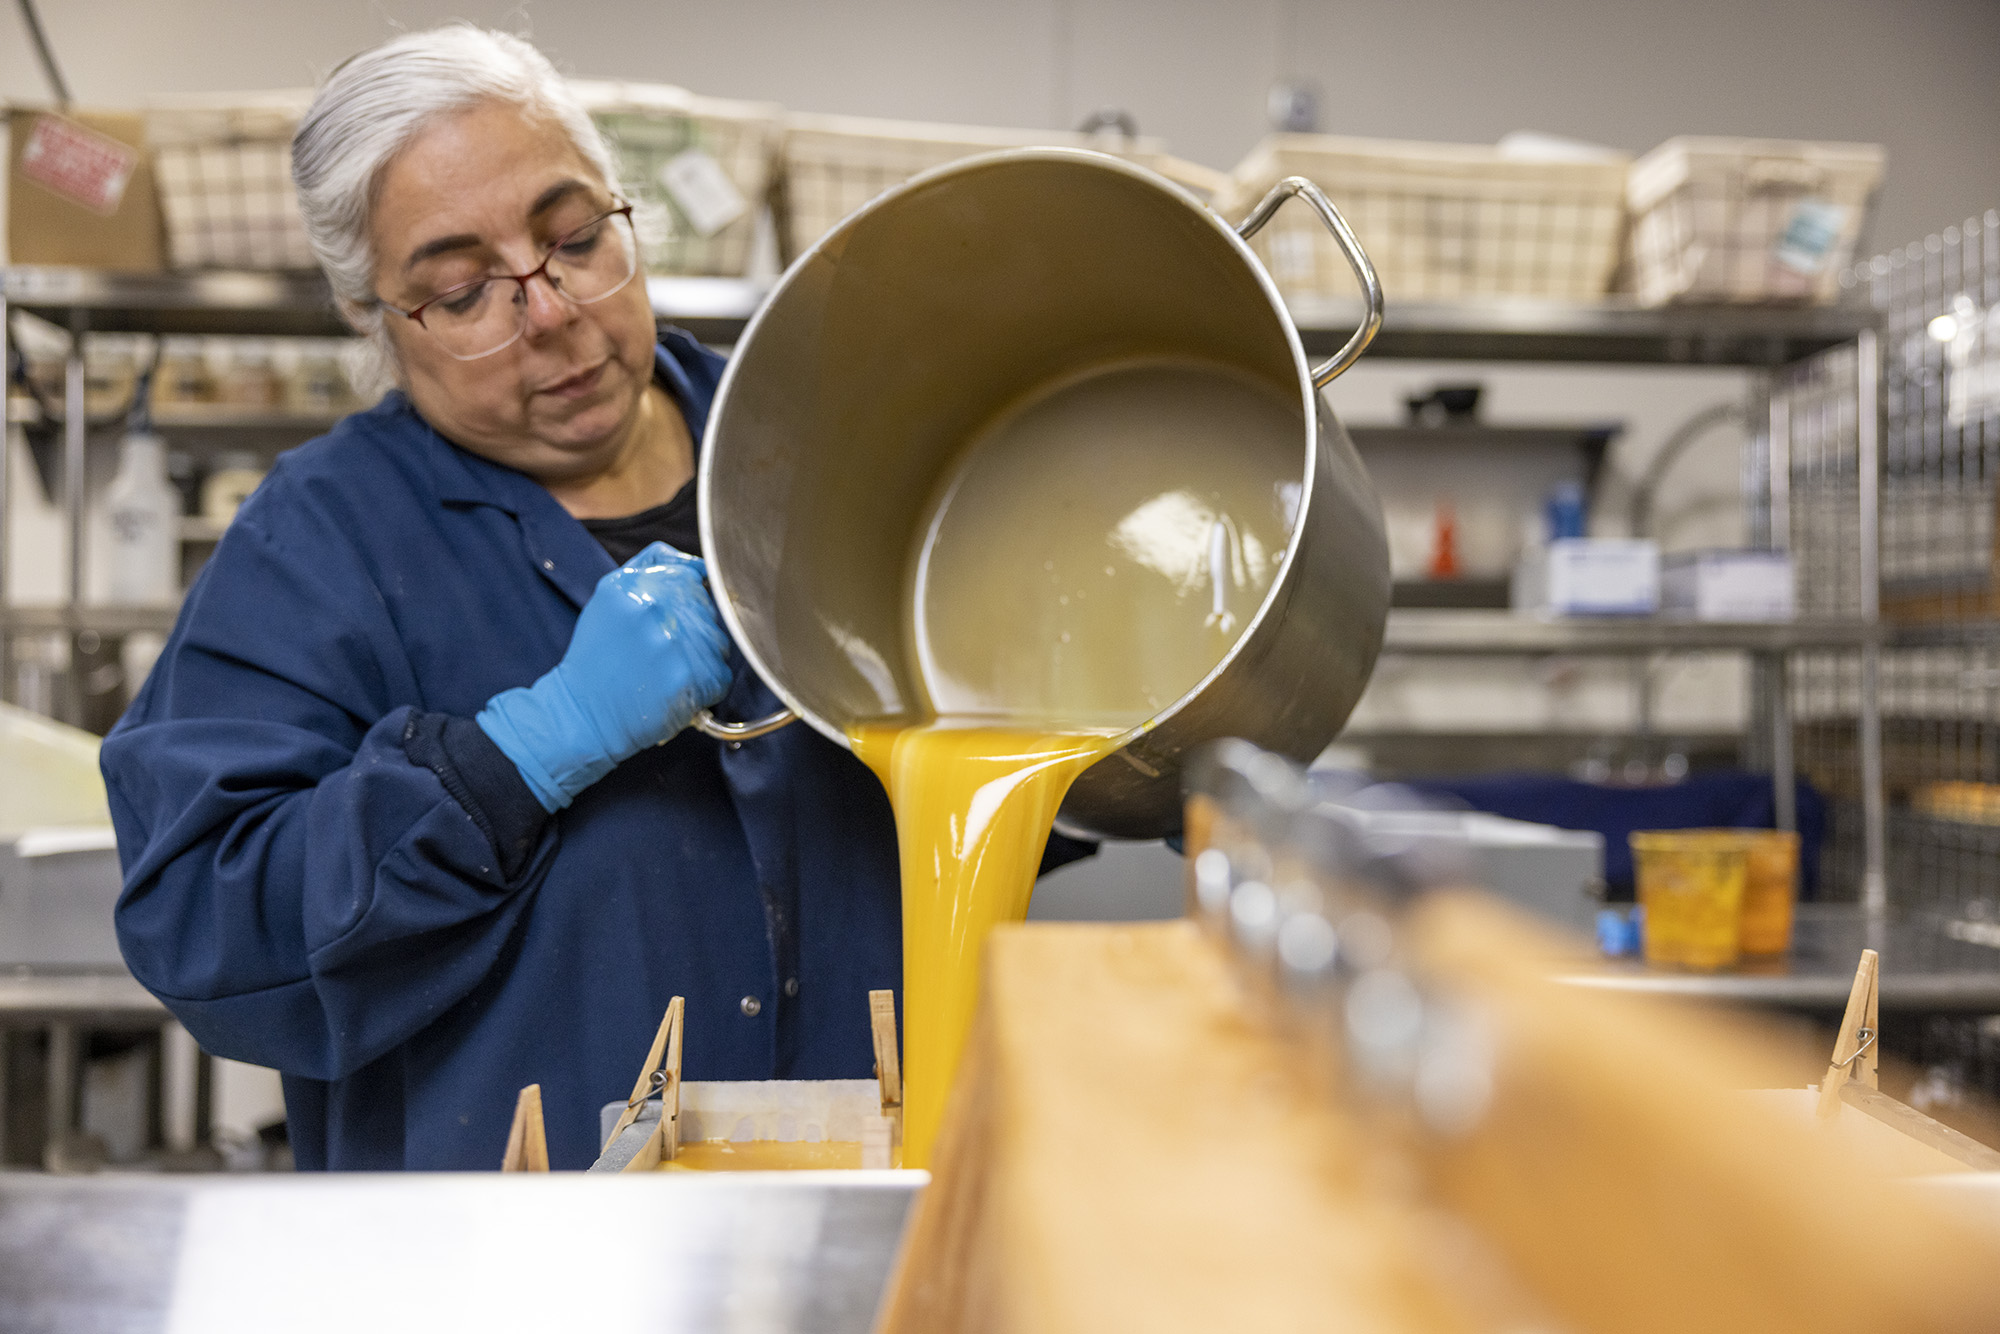 Owner and founder of Soap Cauldron, Emma Mann, pouring large pot of soap into pan to let soap solidify,